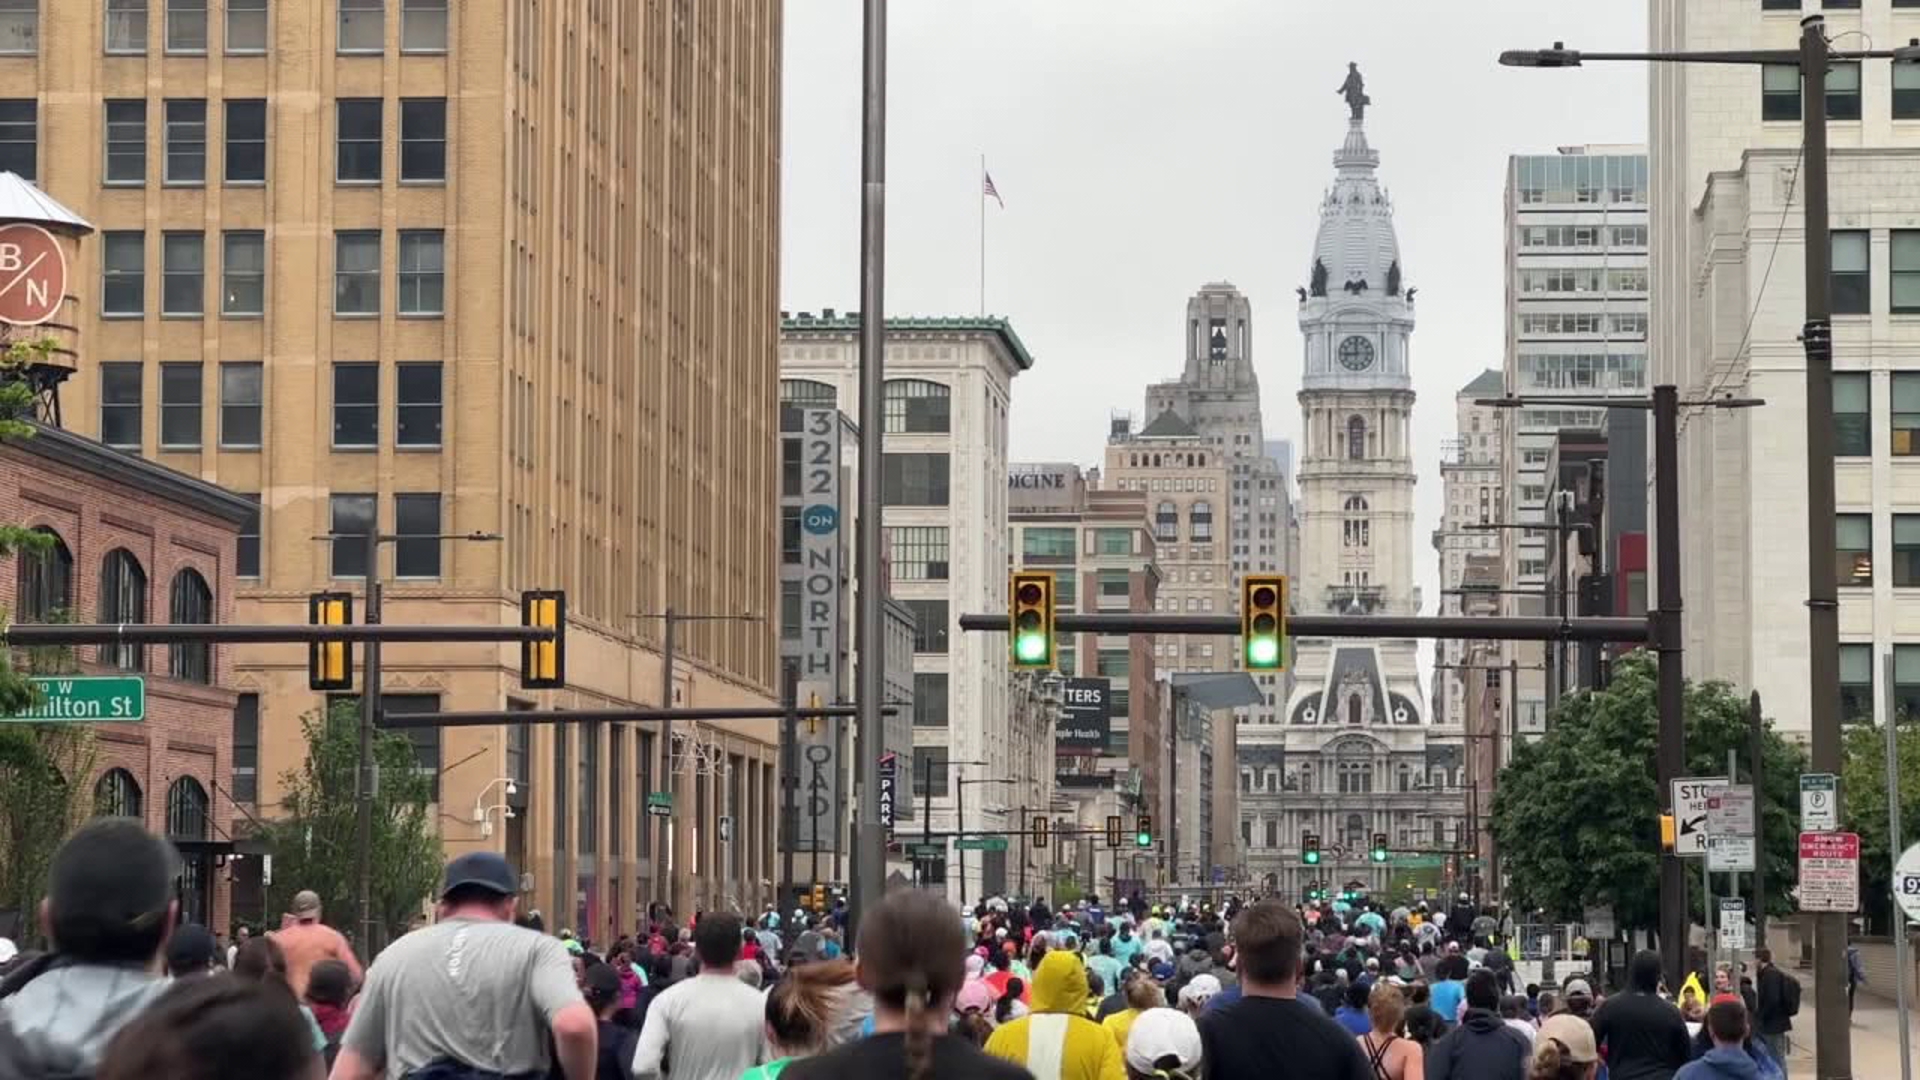 Newswatch 16's Chelsea Strub finds out if any runners travel as far as the City of Brotherly Love to hit the pavement.